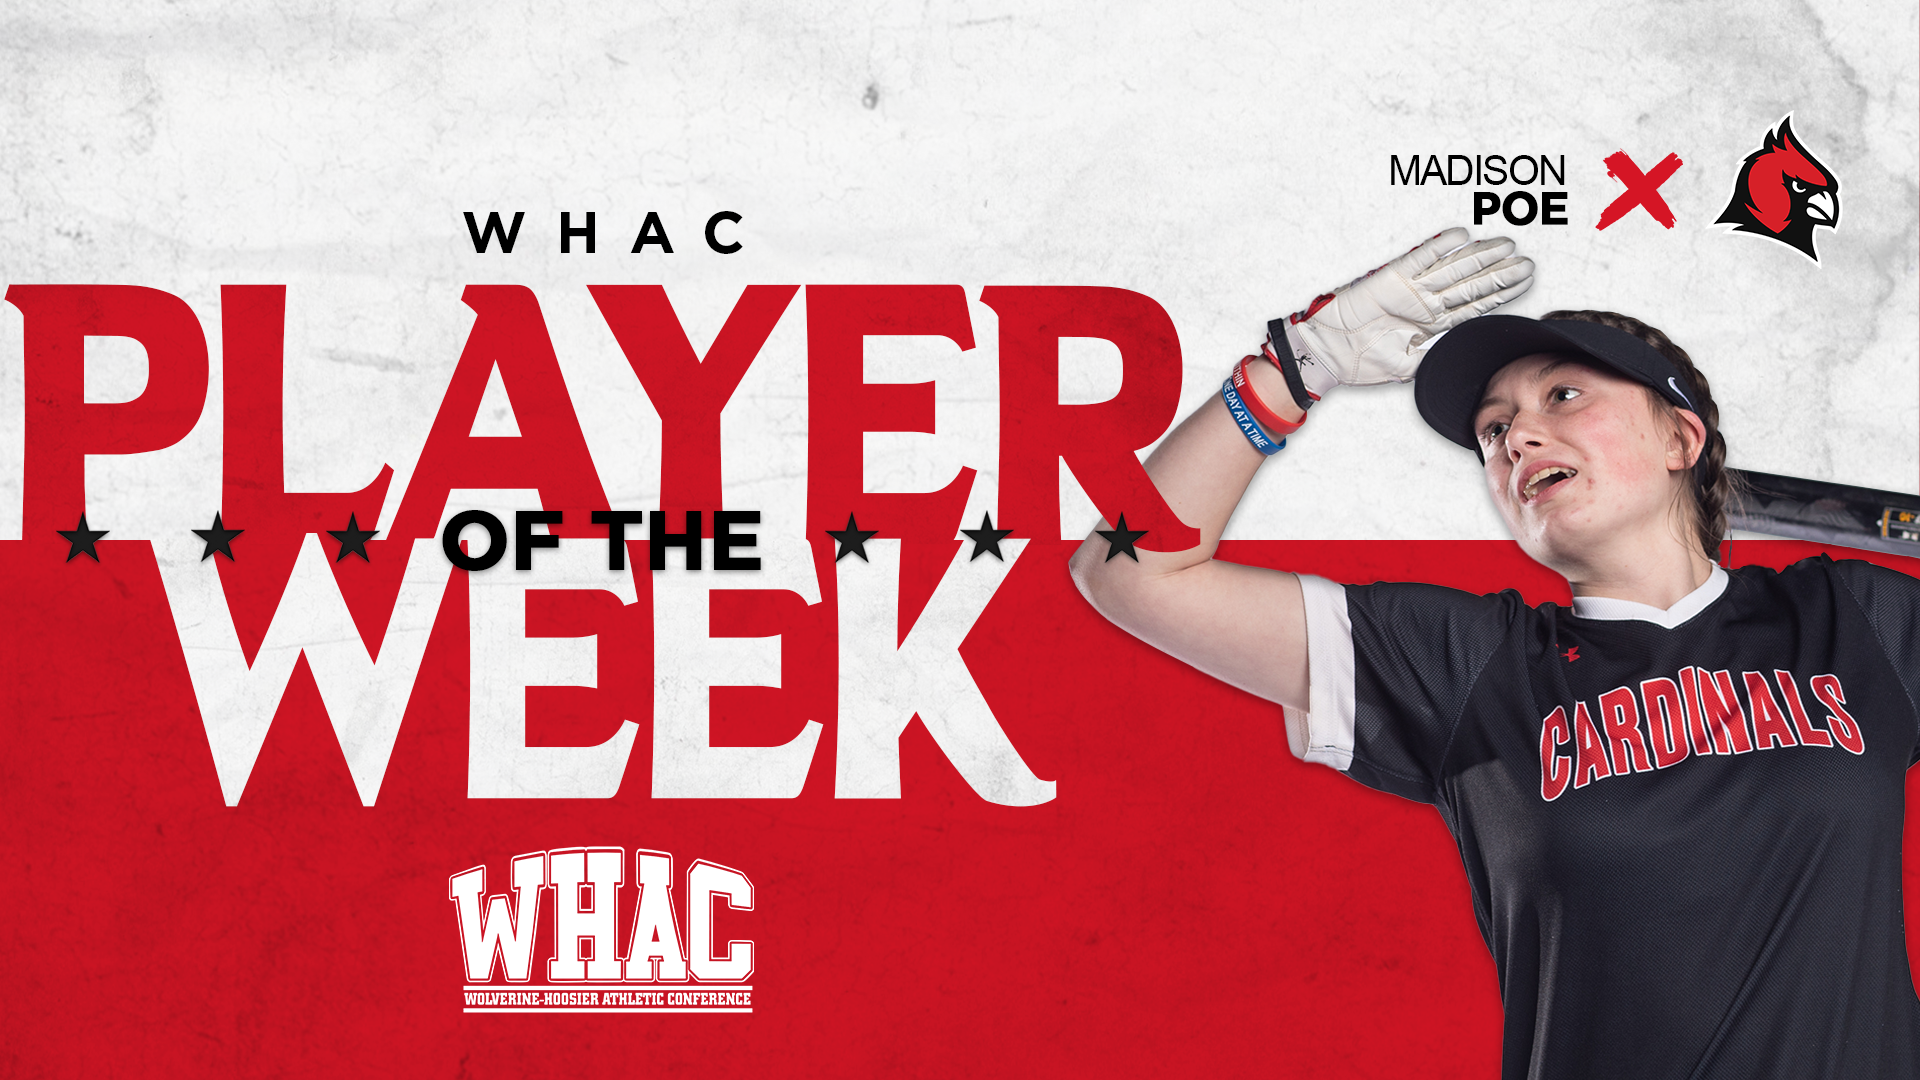 Poe earns WHAC Player of the Week